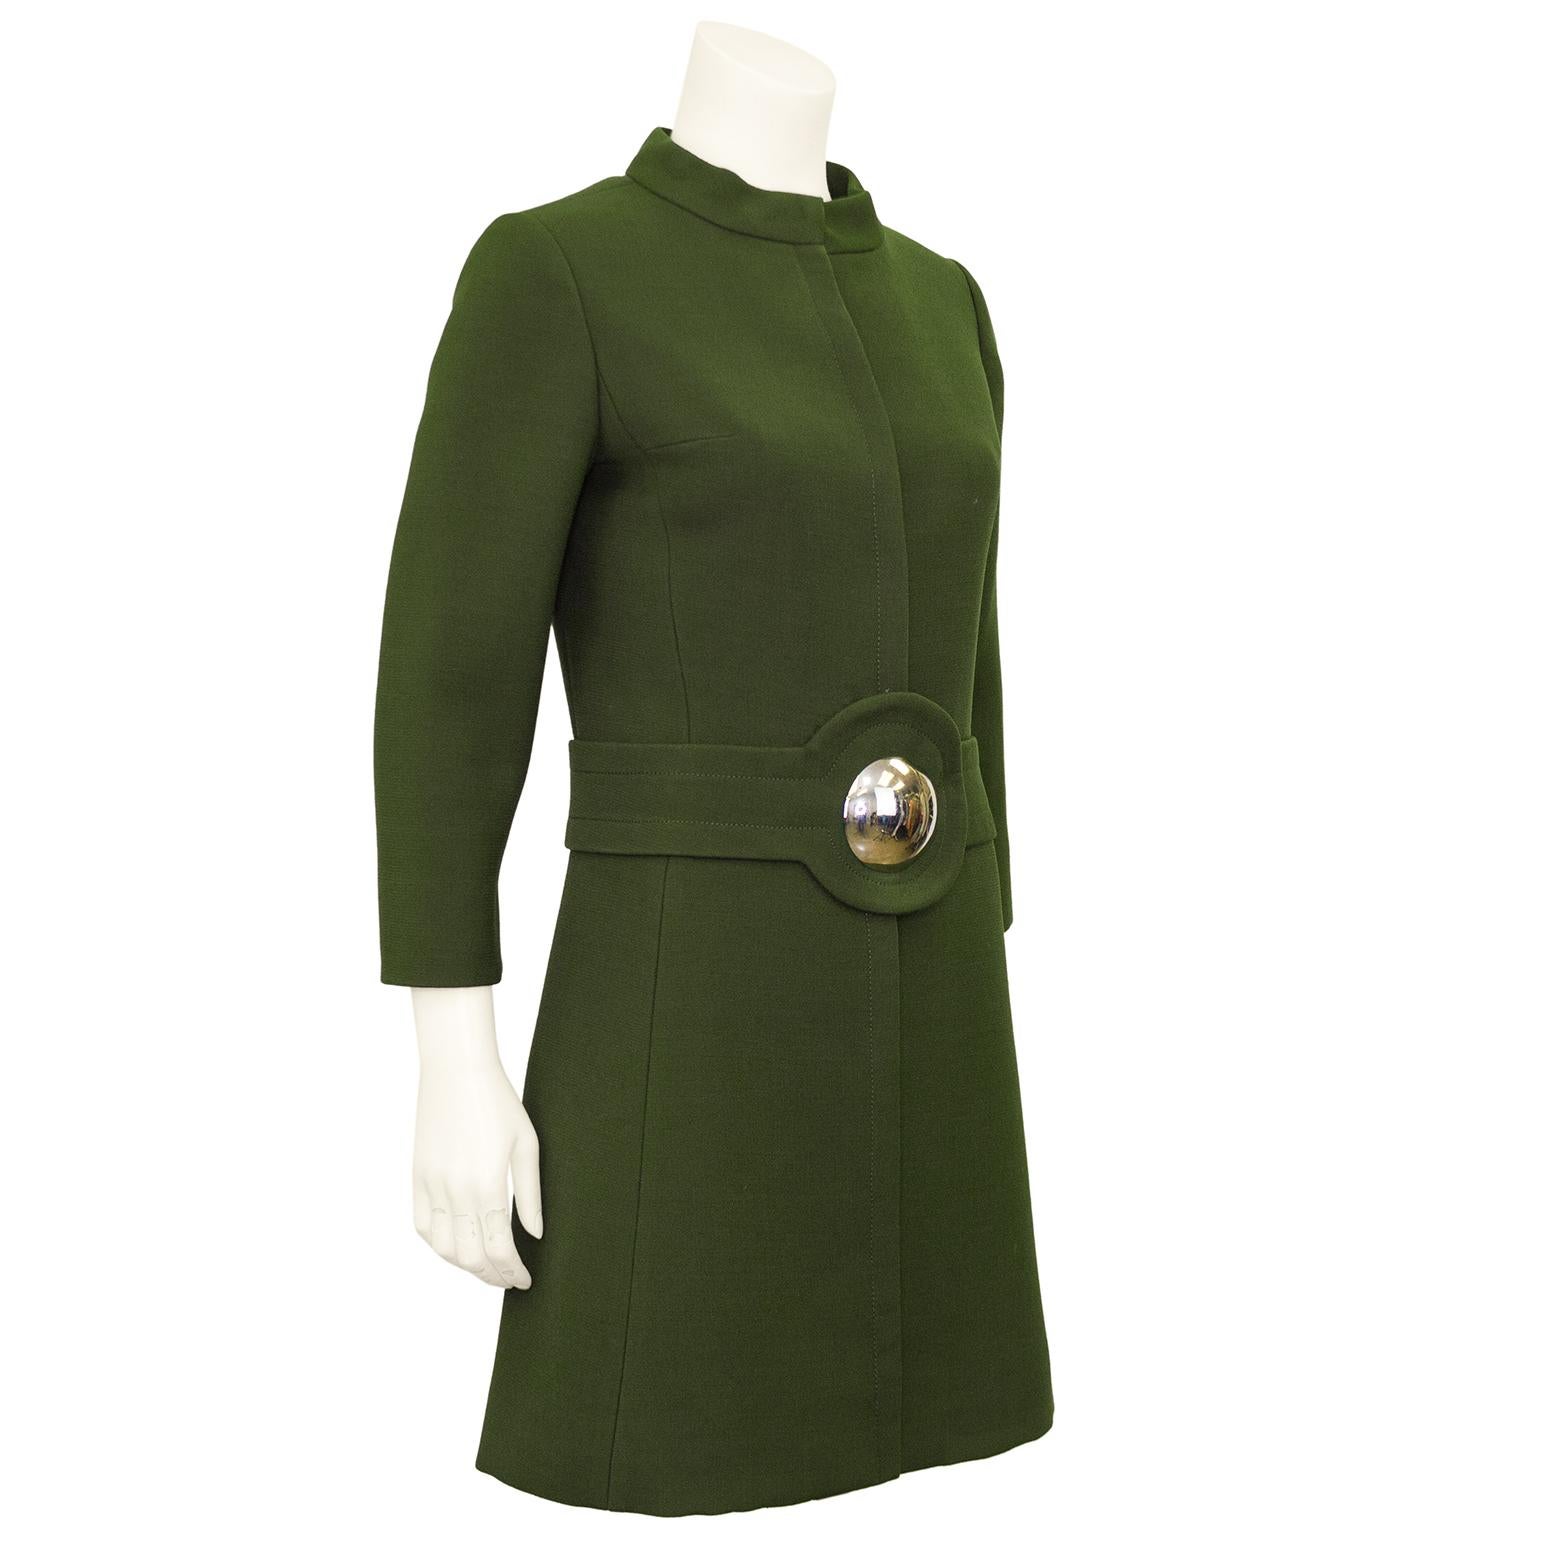 1960s mod Pierre Cardin is the chicest of the chic, and this olive green wool coat dress is no exception. Shift shape with a mandarin collar, bracelet length sleeves and a hidden button placket down the centre seam. Large spherical silver metal